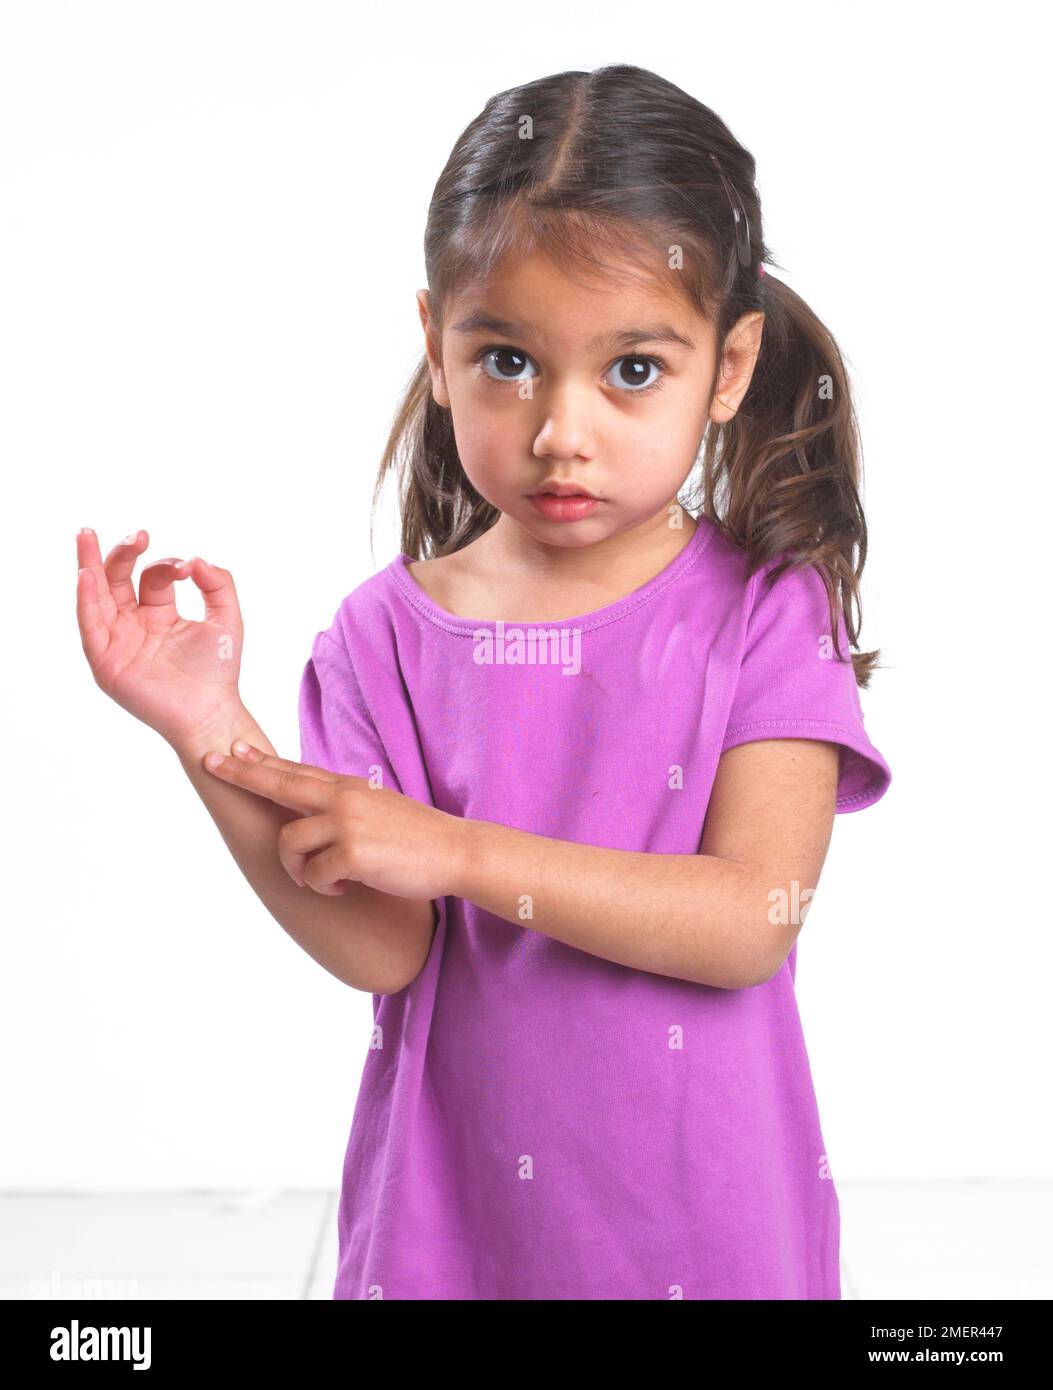 Girl wearing pink top feeling for a pulse in her wrist, 3.5 years Stock Photo